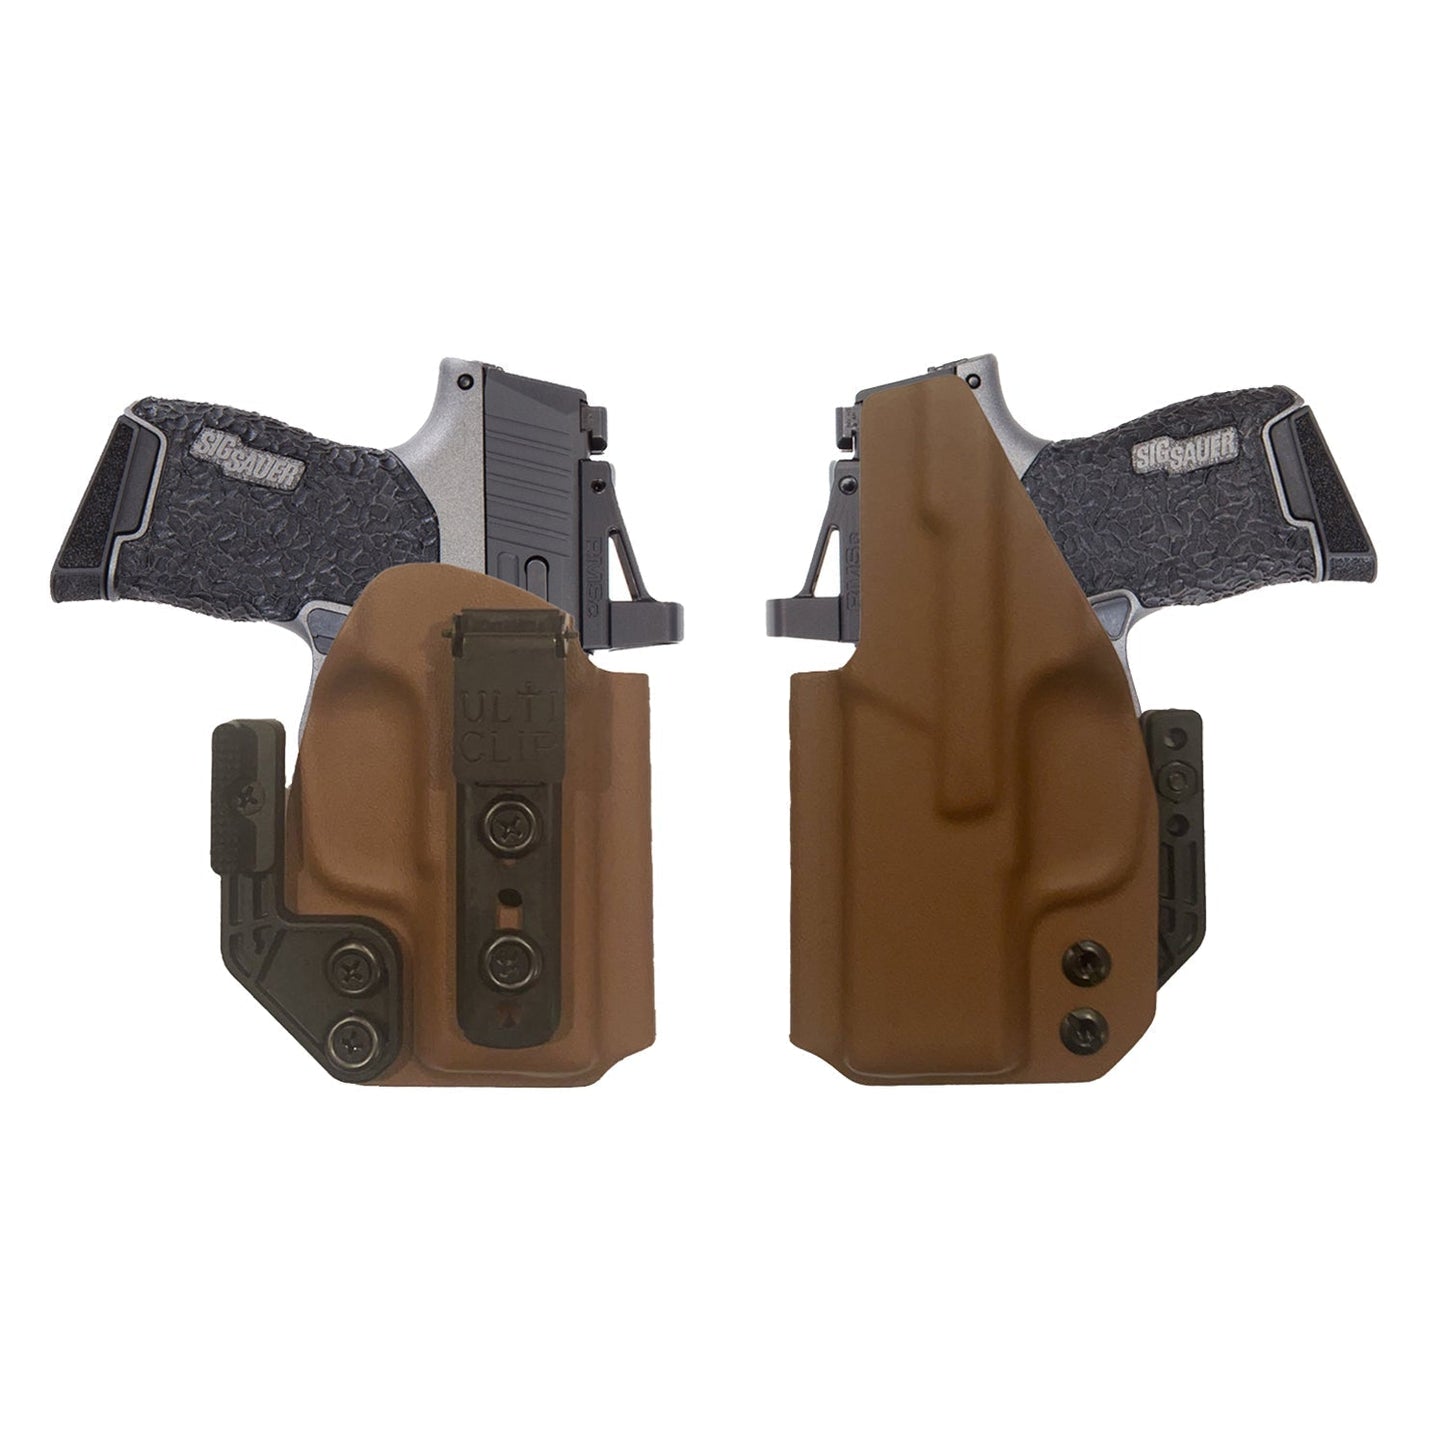 GLOCK 19/ 19X WIth (ULTI-CLIP 3) IWB (Inside The Waistband Holster)